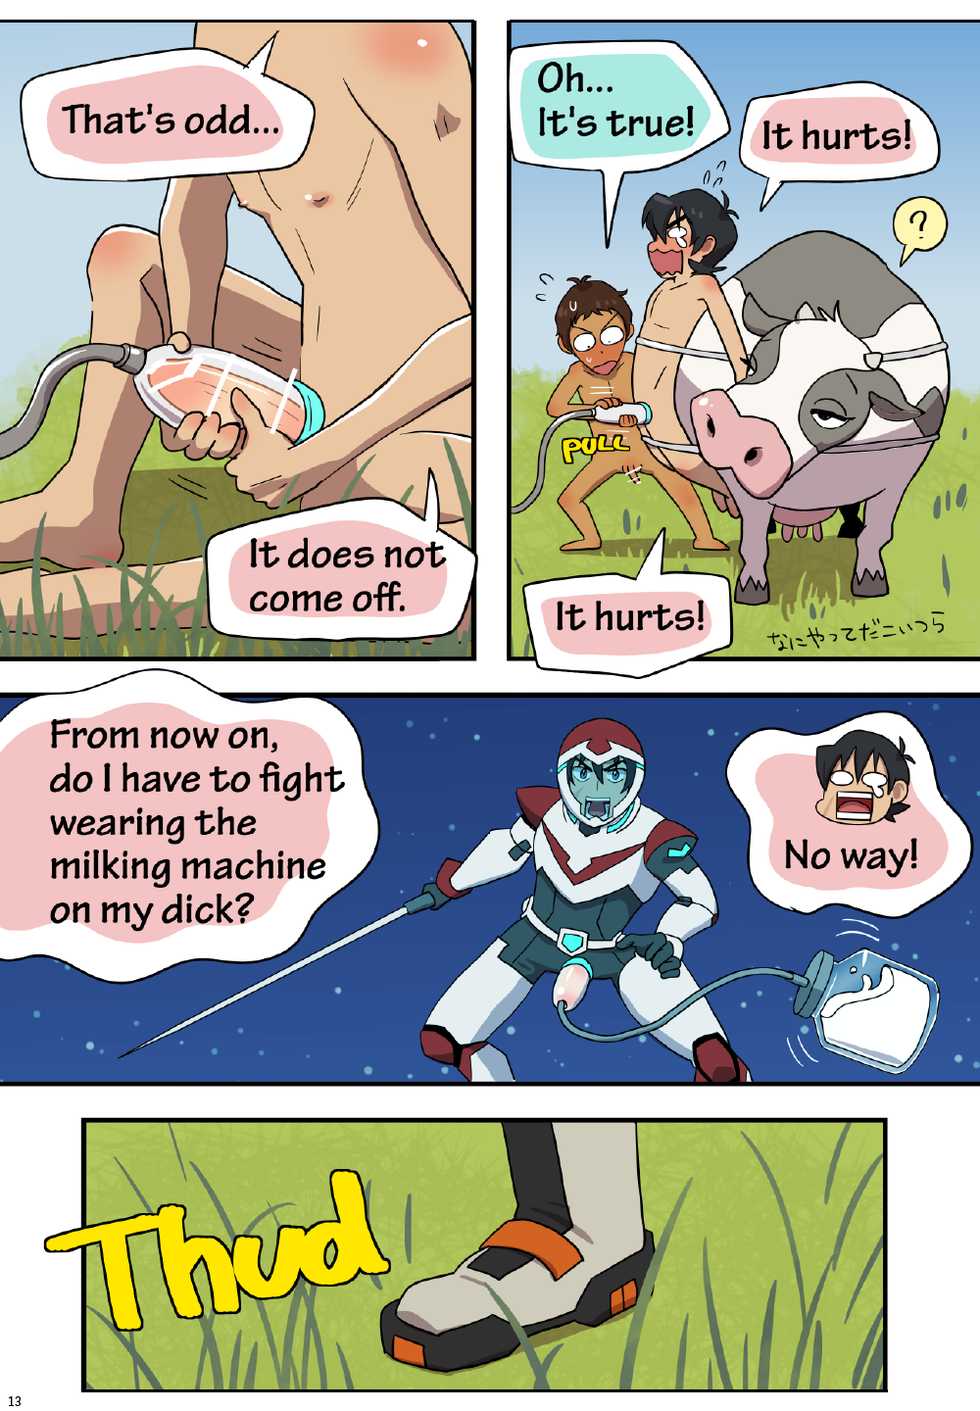 [halleseed] Loving Milking! (Voltron: Legendary Defender) [English] - Page 14